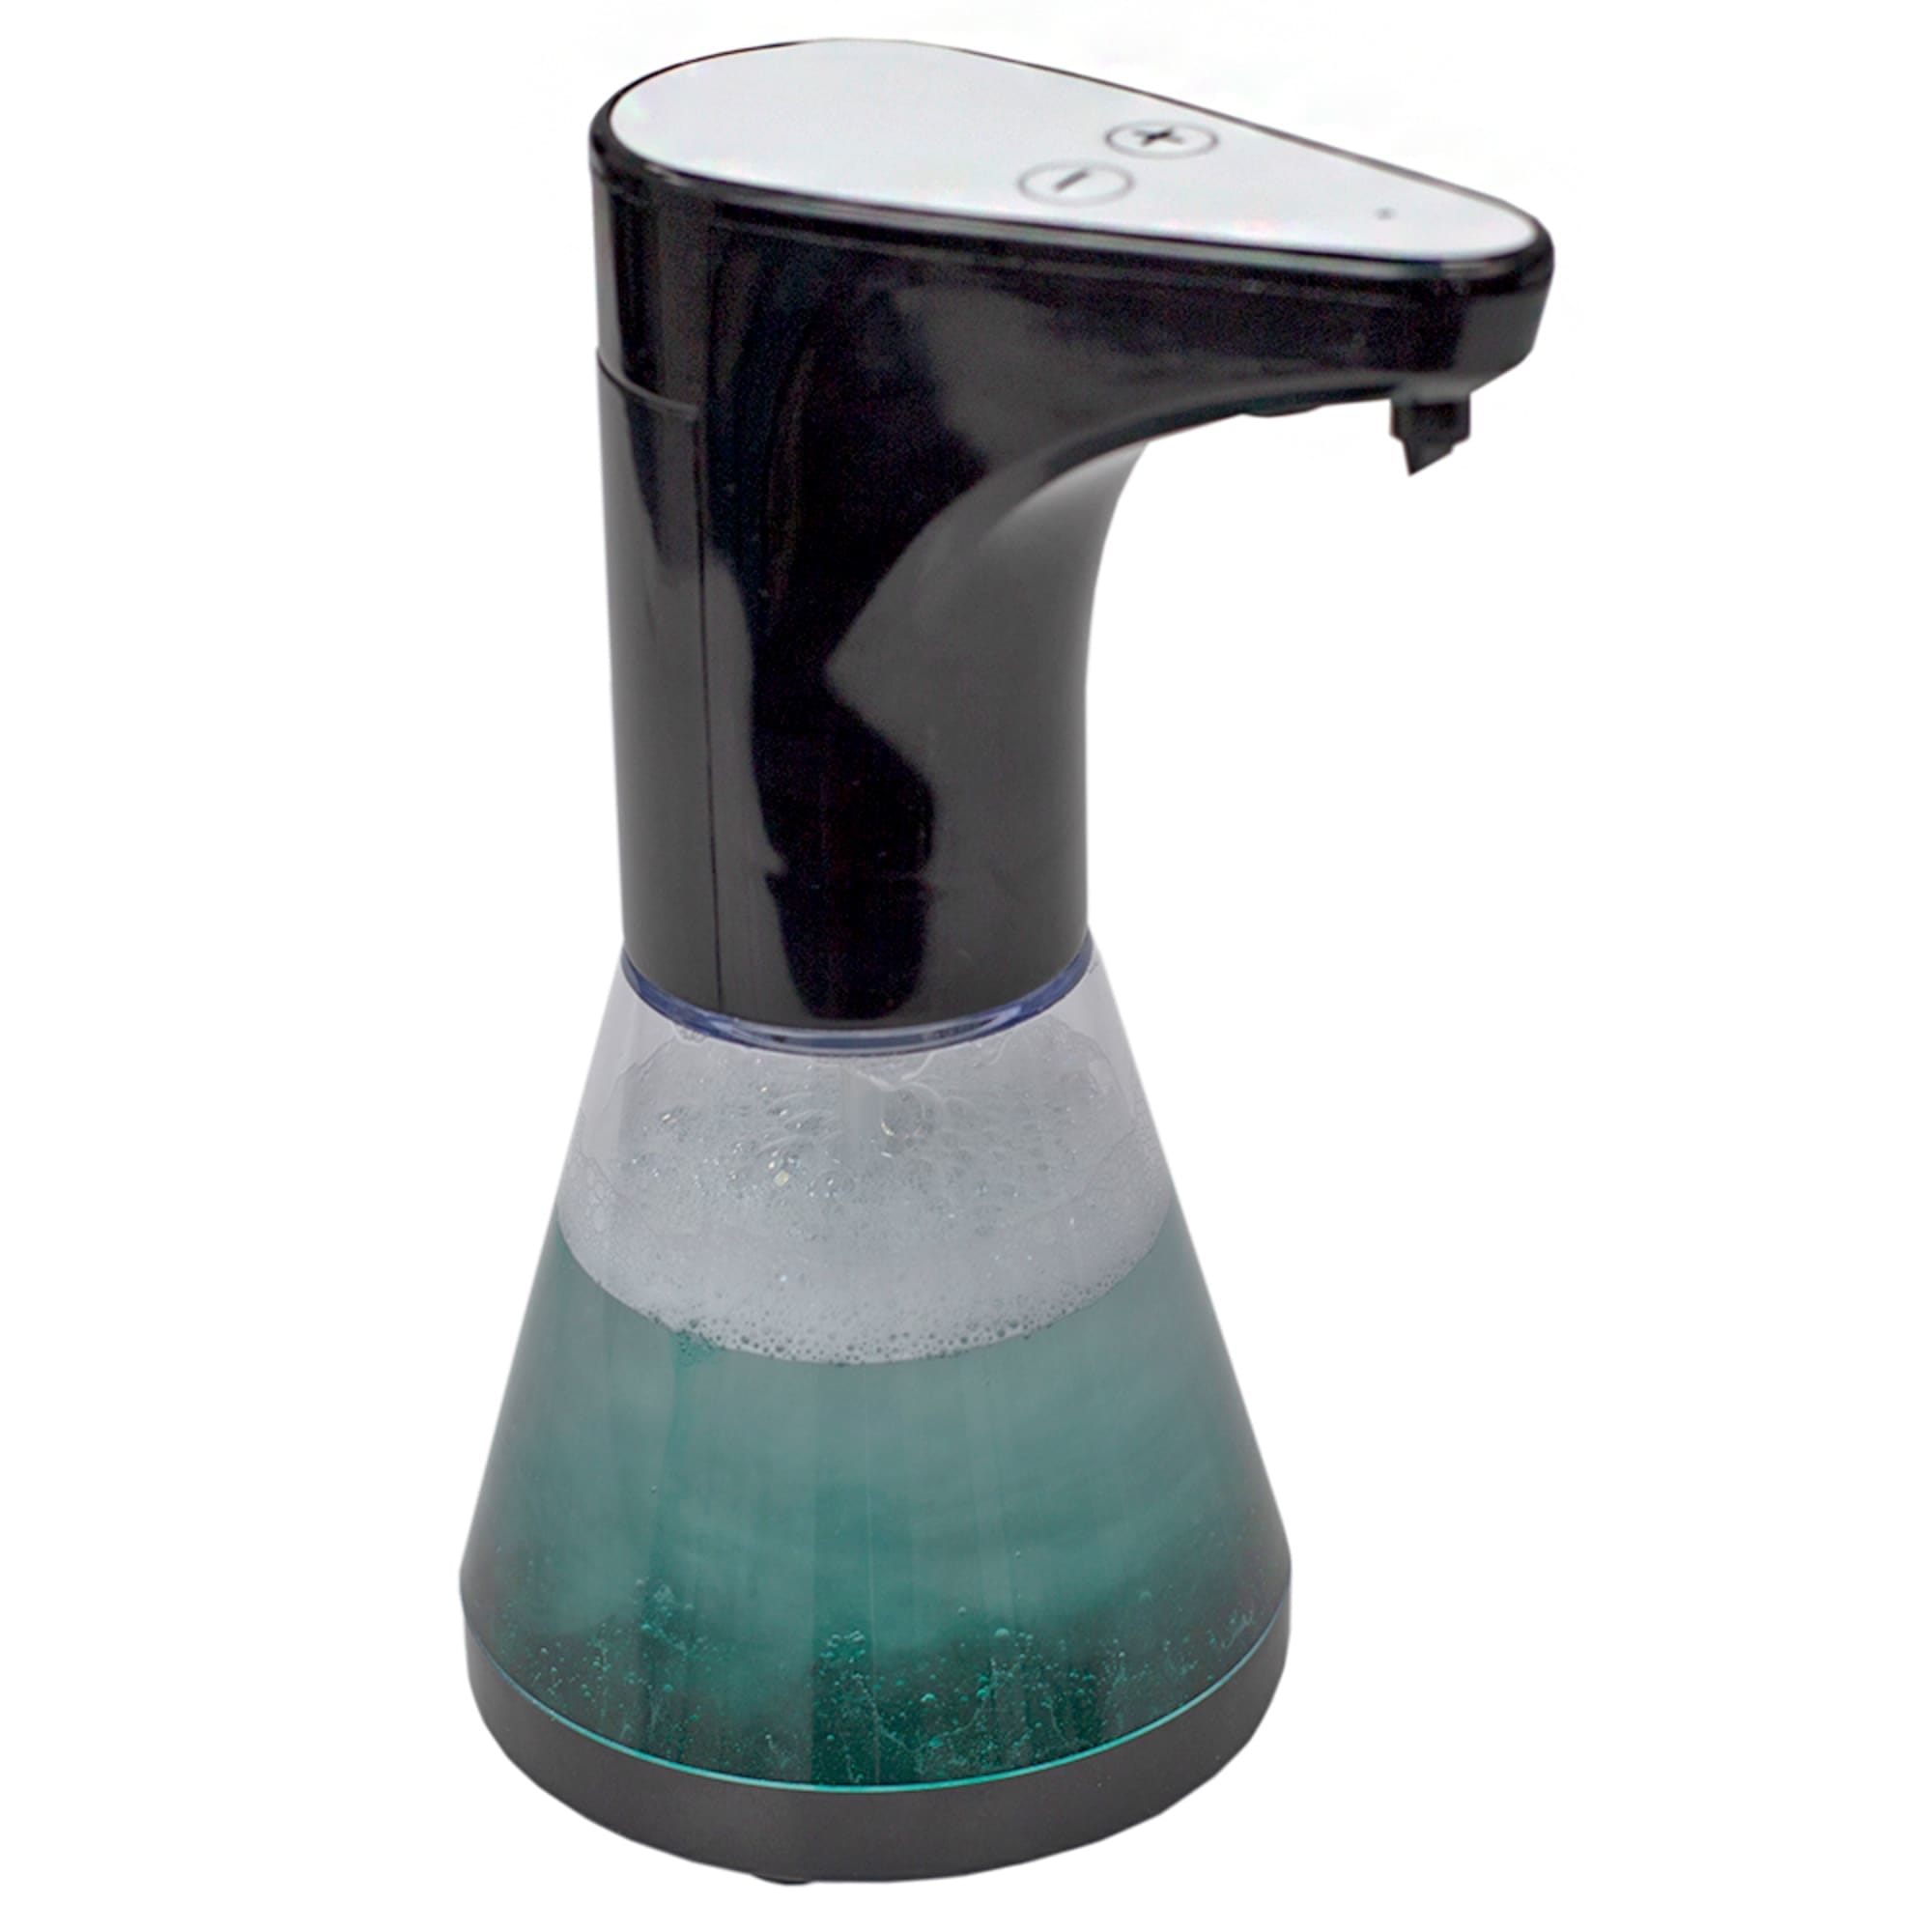 Home Basics 450 ml. Automatic Compact Countertop Soap Dispenser, Black $12.00 EACH, CASE PACK OF 6